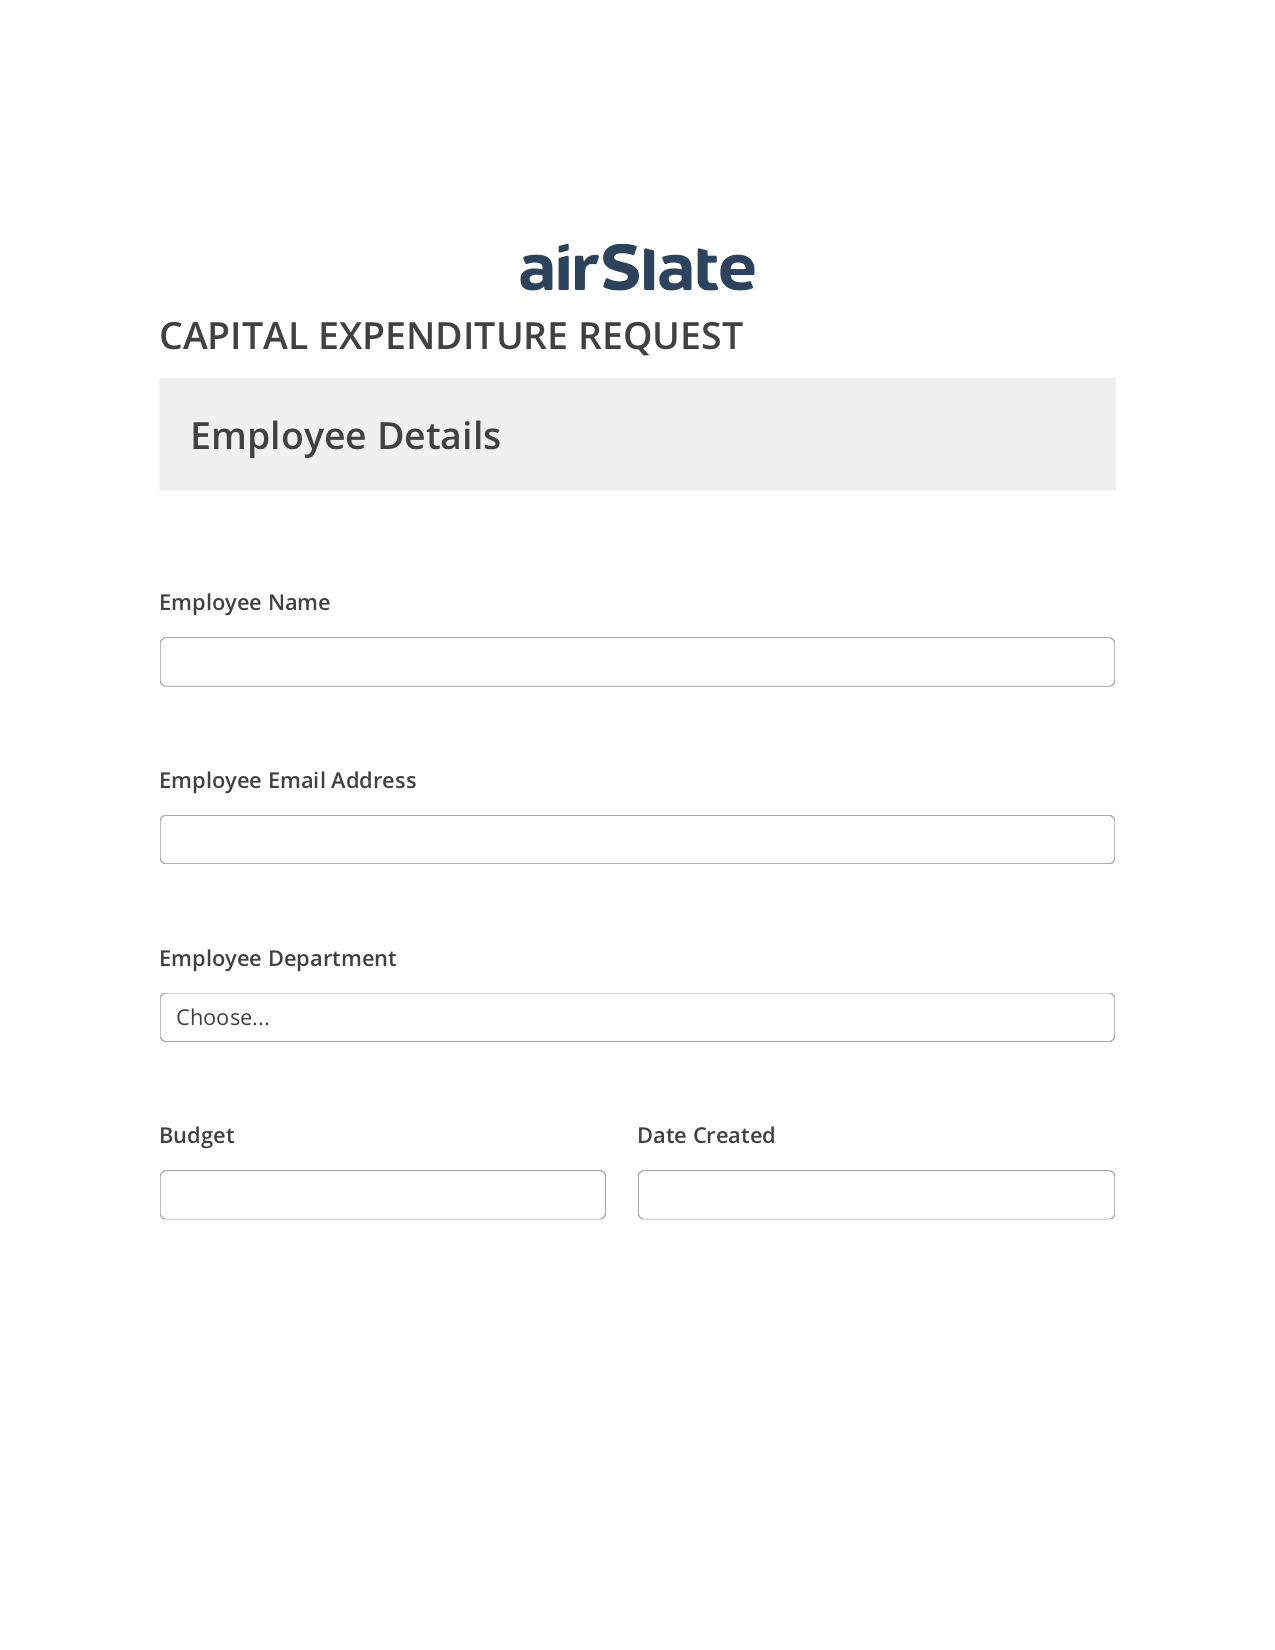 Capital Expenditure Request Approval Workflow Pre-fill Dropdown from Airtable, Create slate bot, Archive to SharePoint Folder Bot